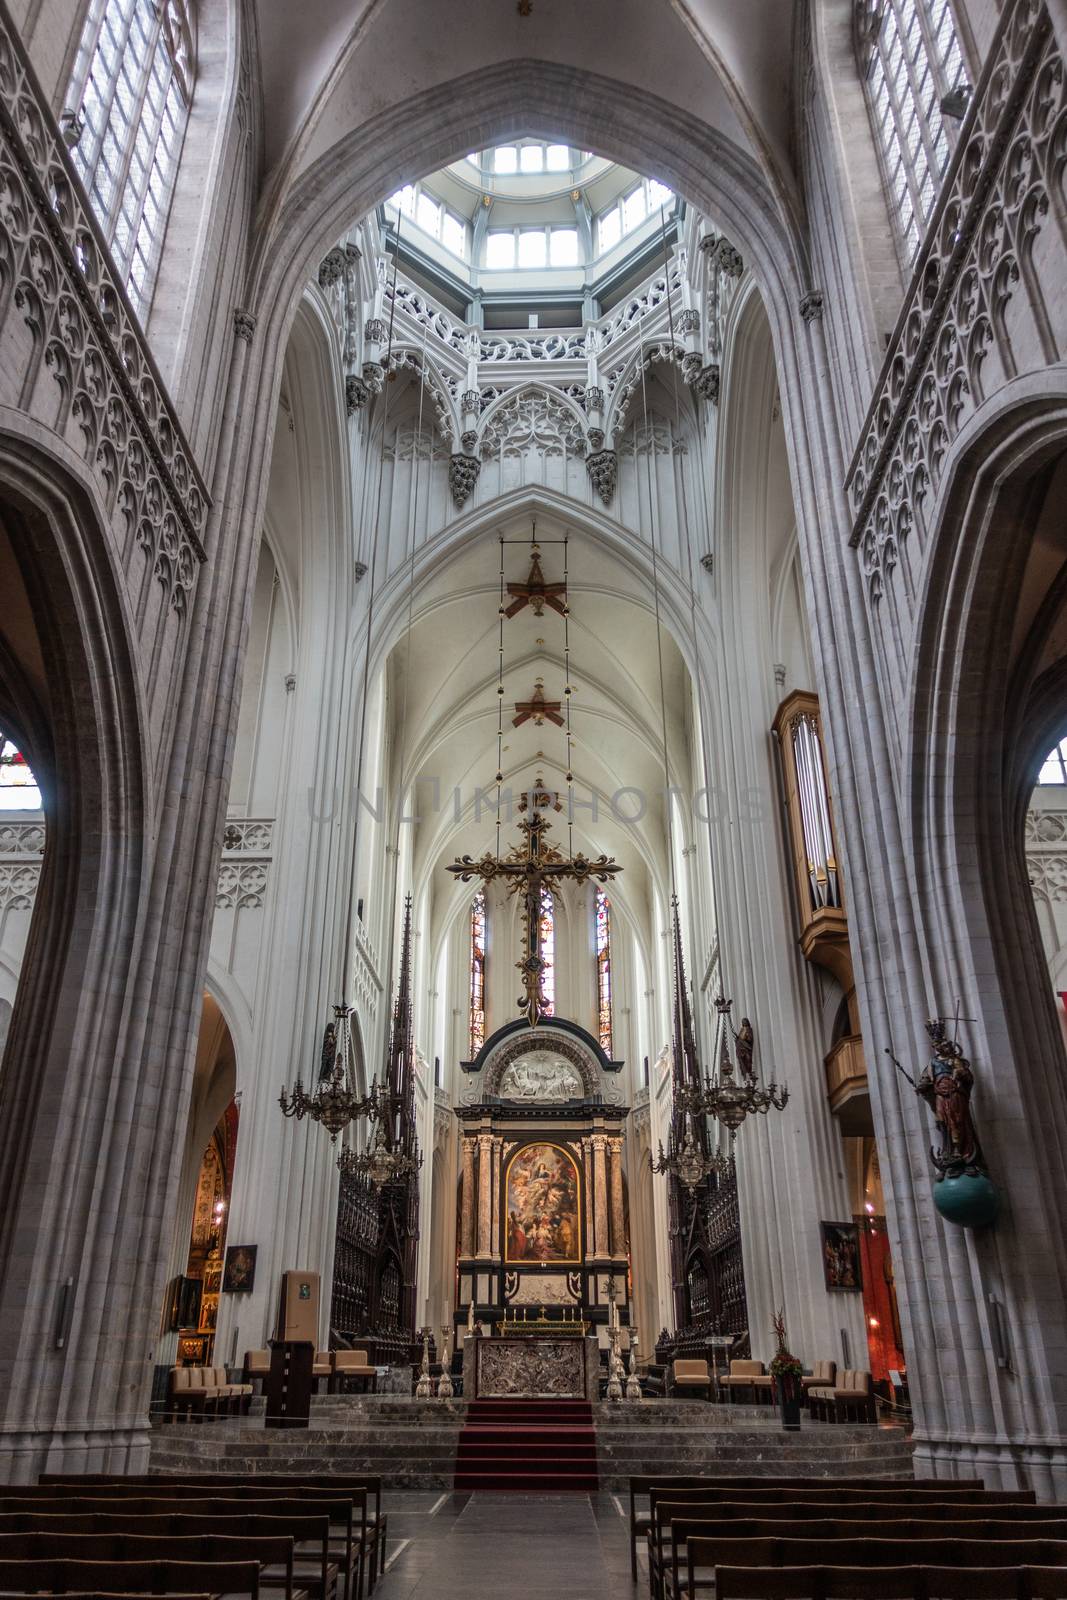 Antwerp, Belgium - September 24, 2018: Long shot on The Assumption of the Virgin Mary painting by Rubens above main altar in Onze-Lieve-Vrouw Cathedral of Our Lady. Pillars, arches, organ, benches.